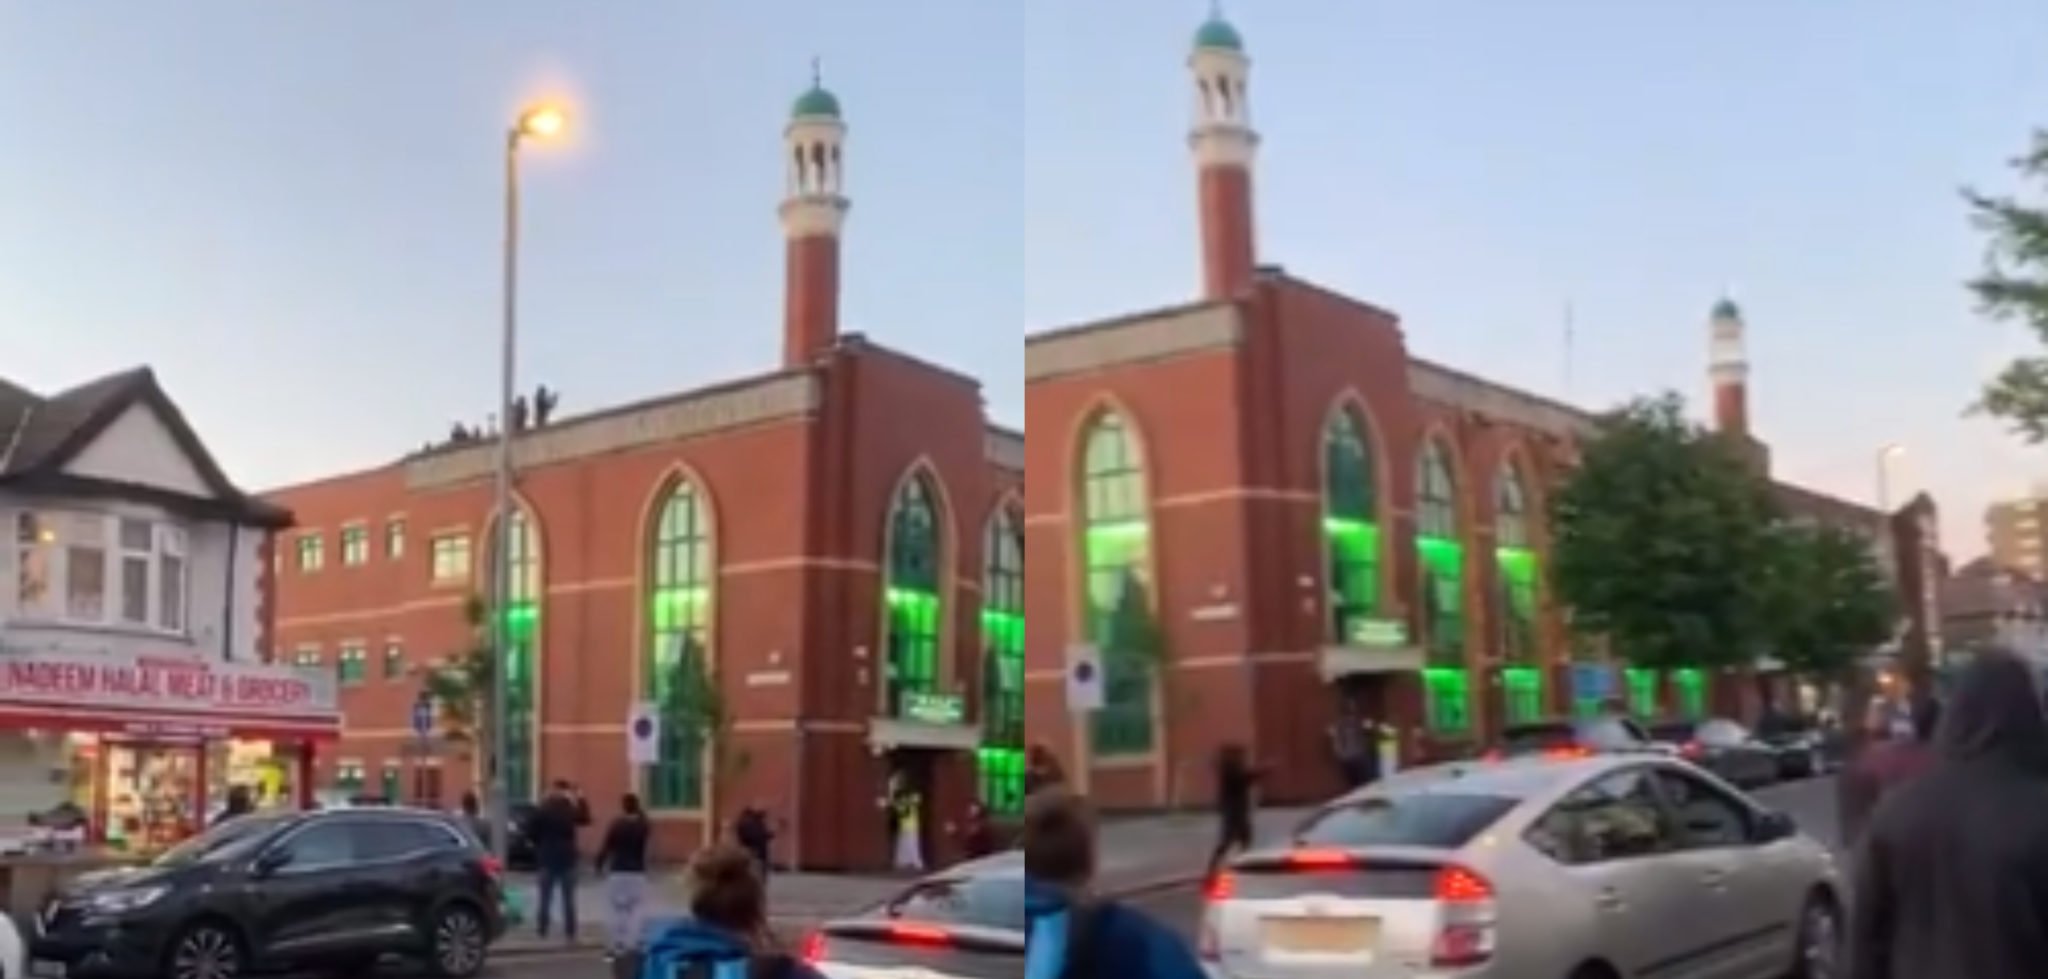 Adhan Heard For The First Time London